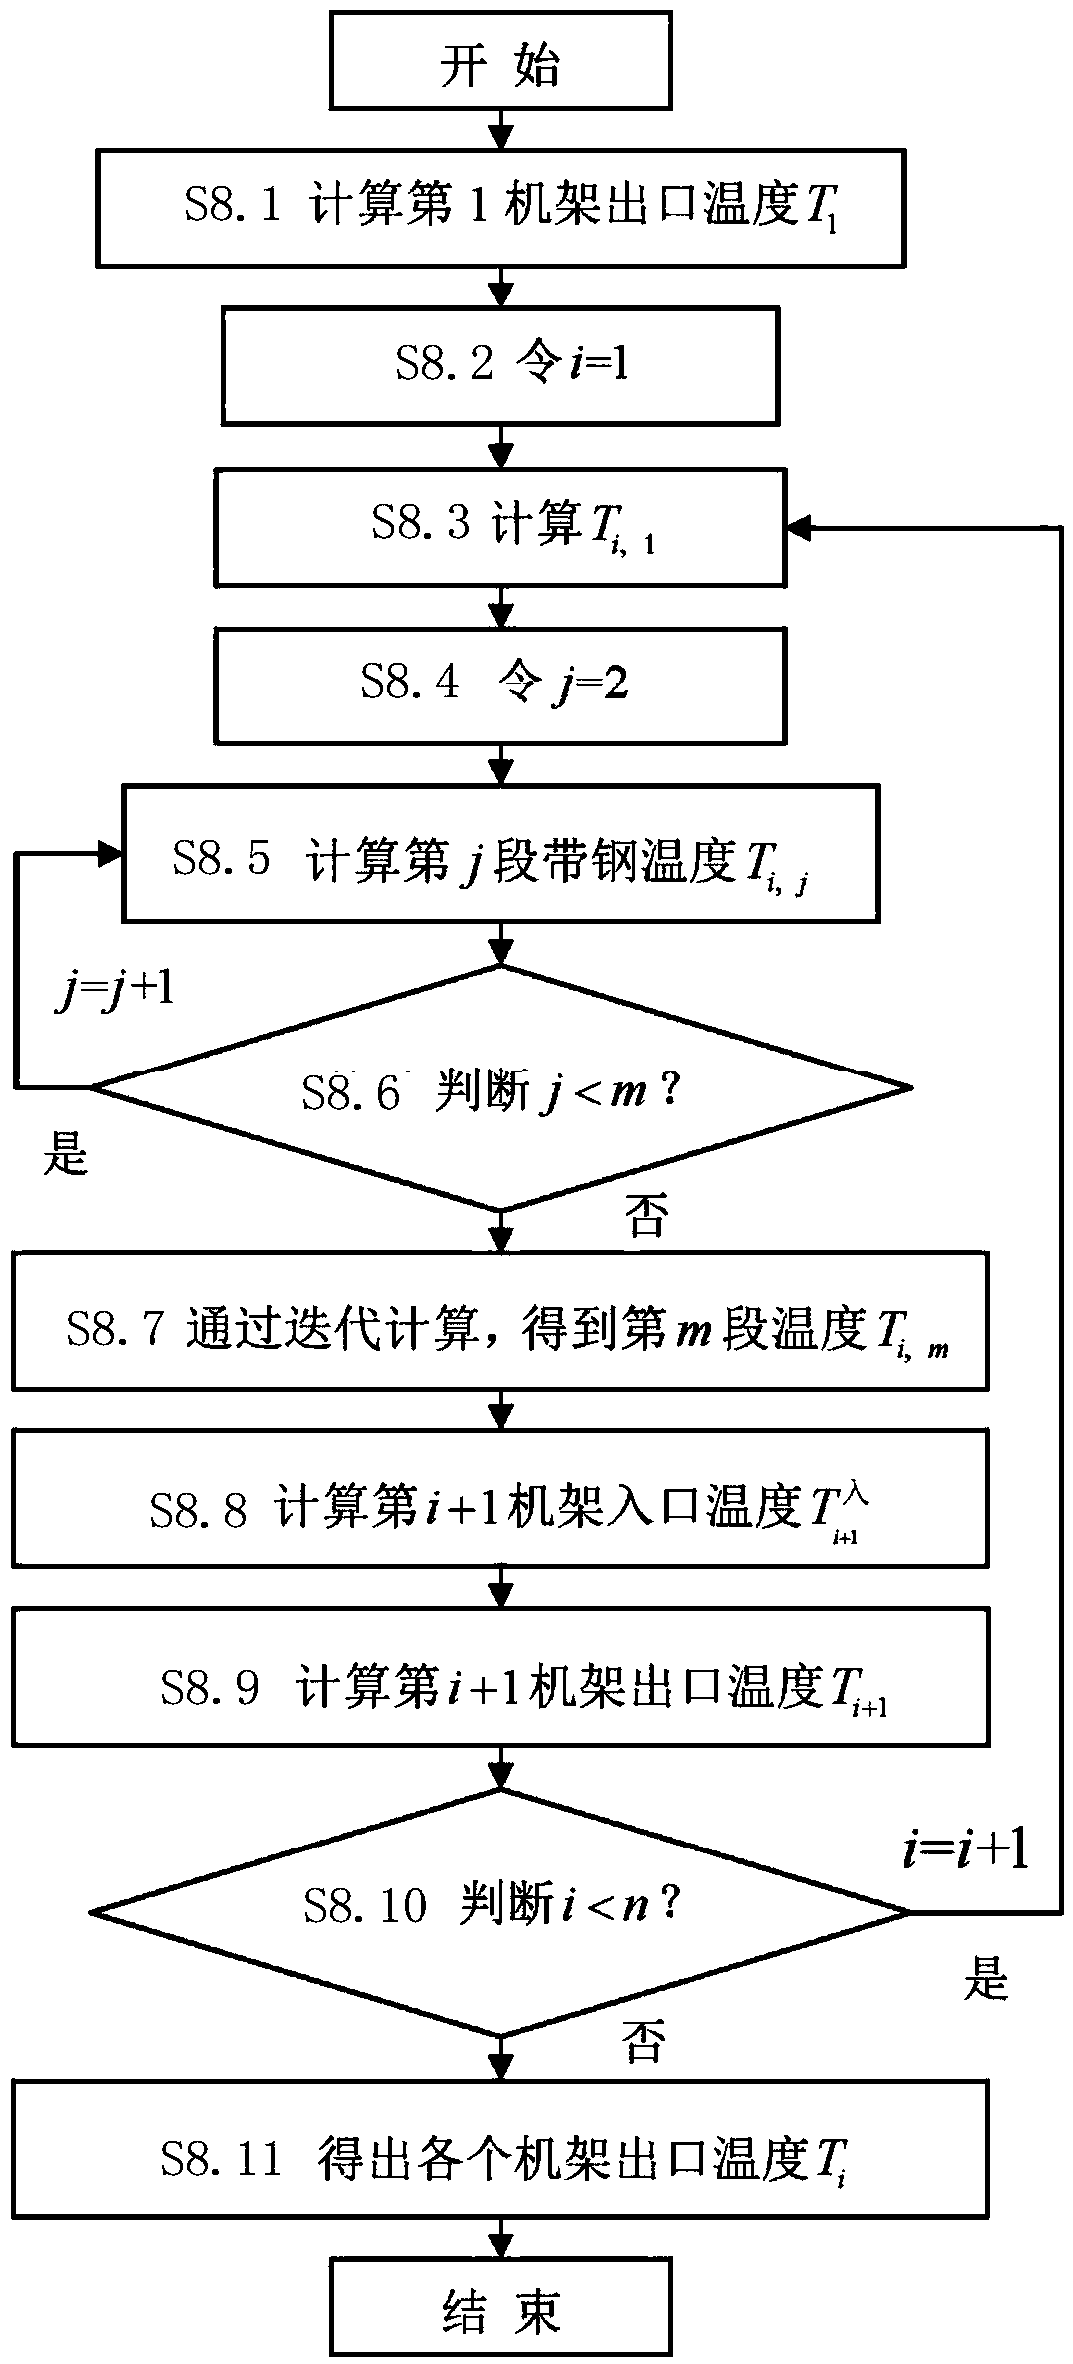 Emulsion flow optimization method for inhibiting vibration of cold continuous rolling unit